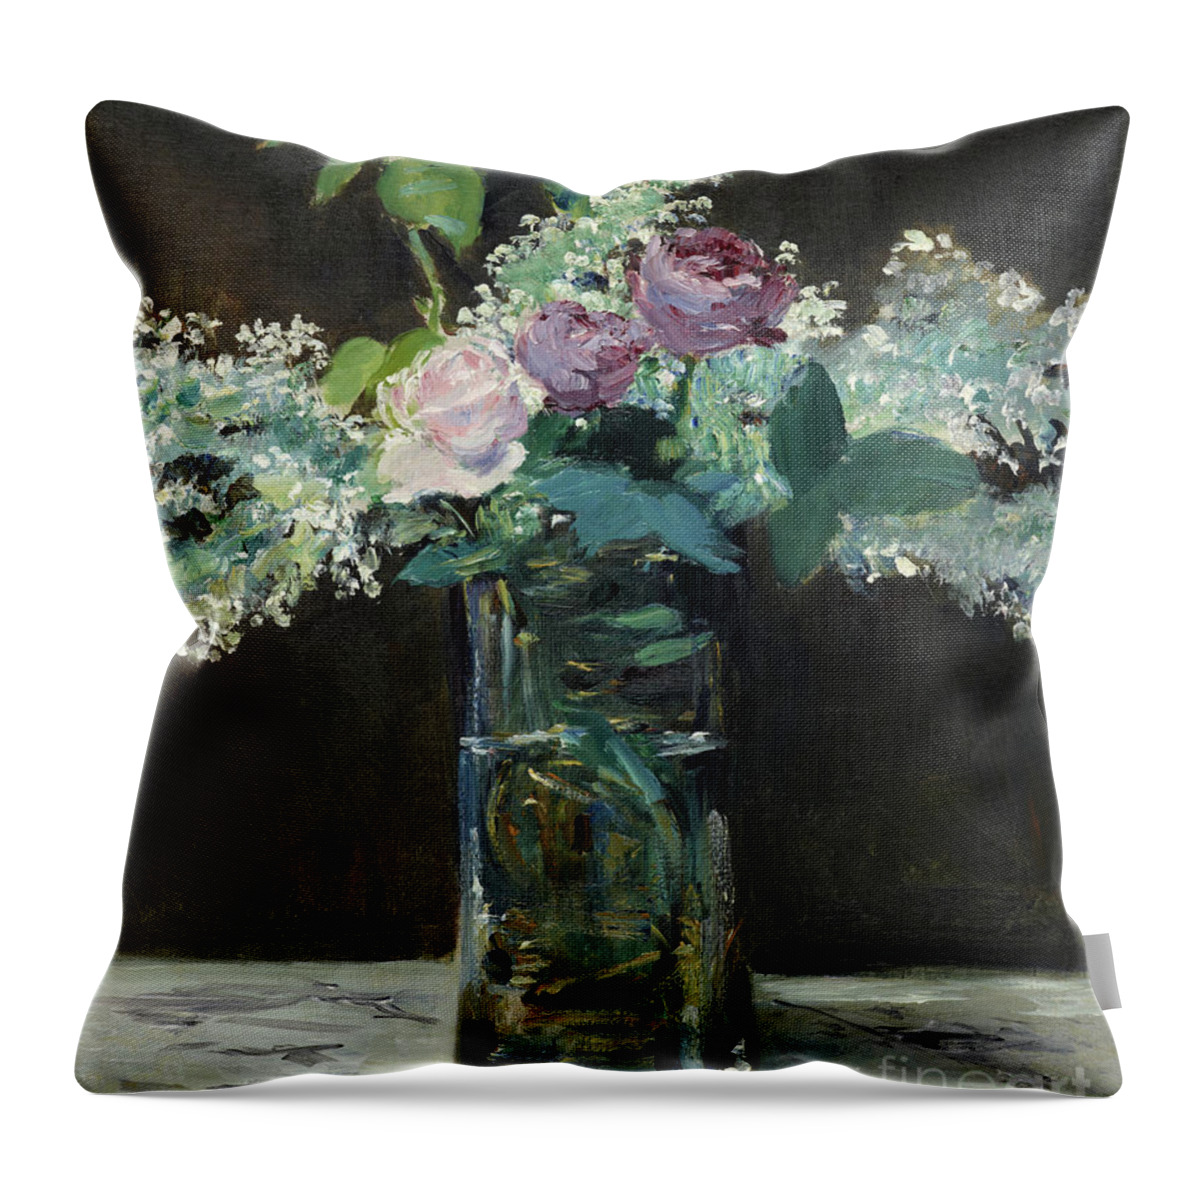 Vase Of White Lilacs And Roses Throw Pillow featuring the painting Vase of White Lilacs and Roses, 1883 by Edouard Manet